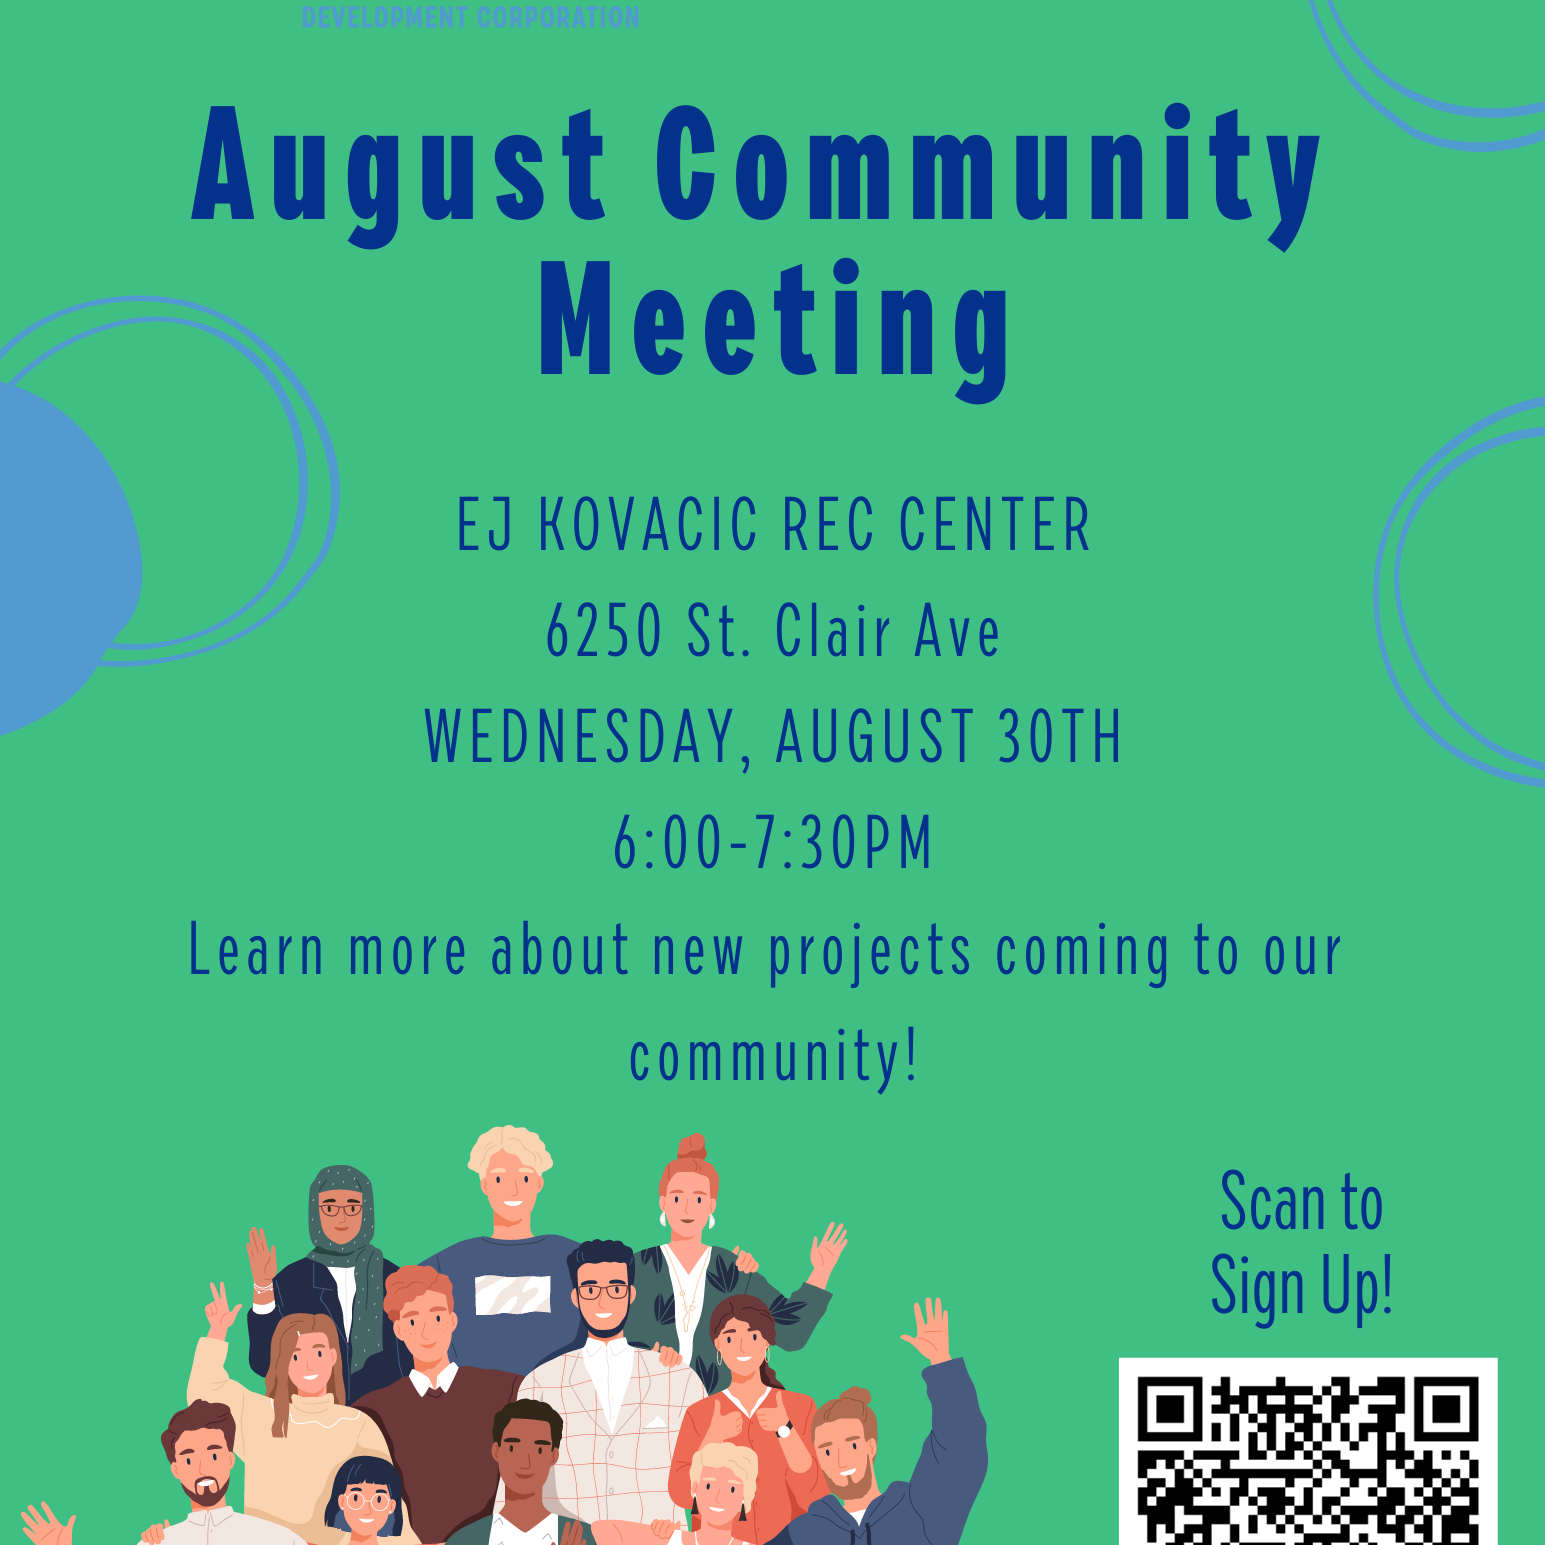 Updated August Community Meeting Flyer